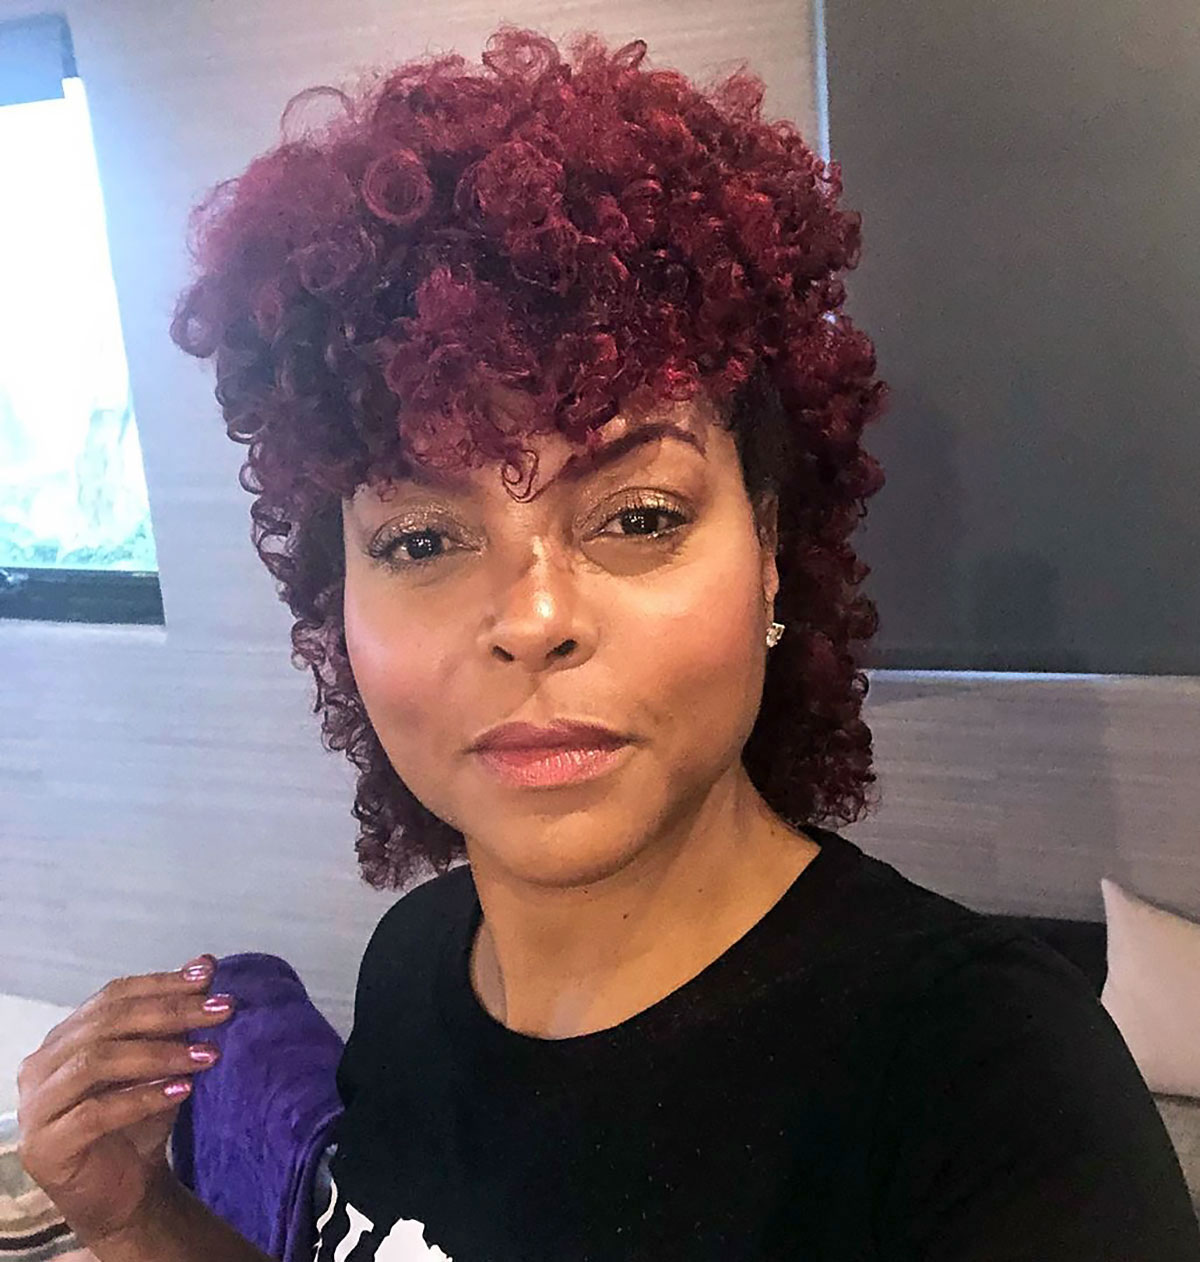 Taraji P. Henson Shares Routine for Naturally Curly Hair: Watch